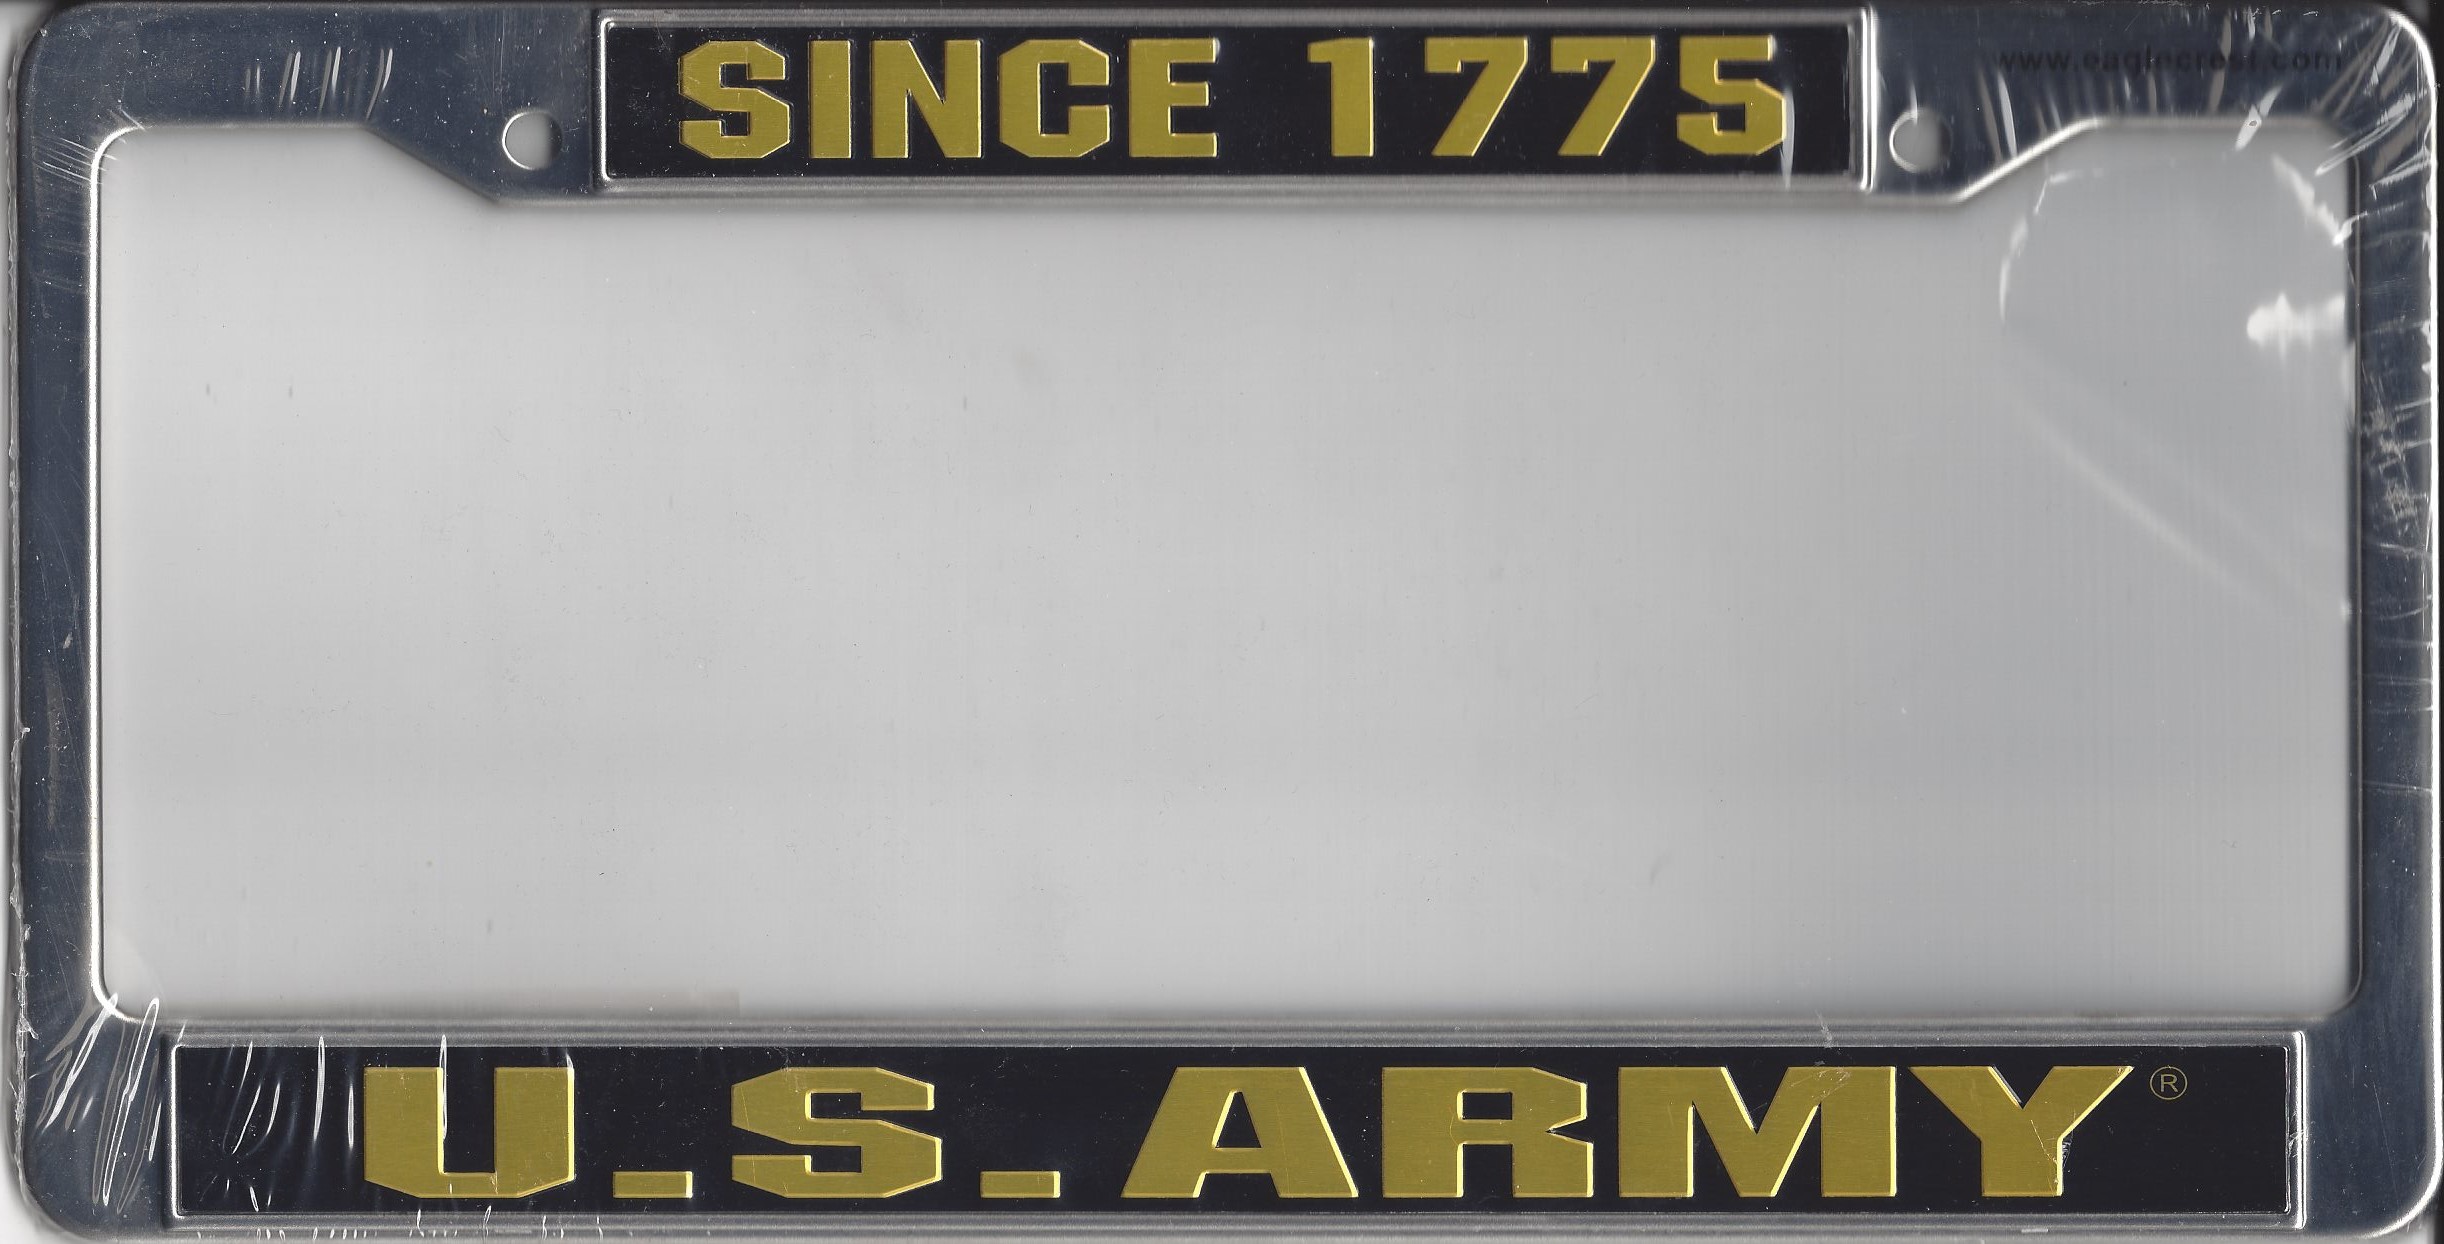 U.S. ARMY Since 1775 License Plate Frame   Free Screw CAPs with this Frame